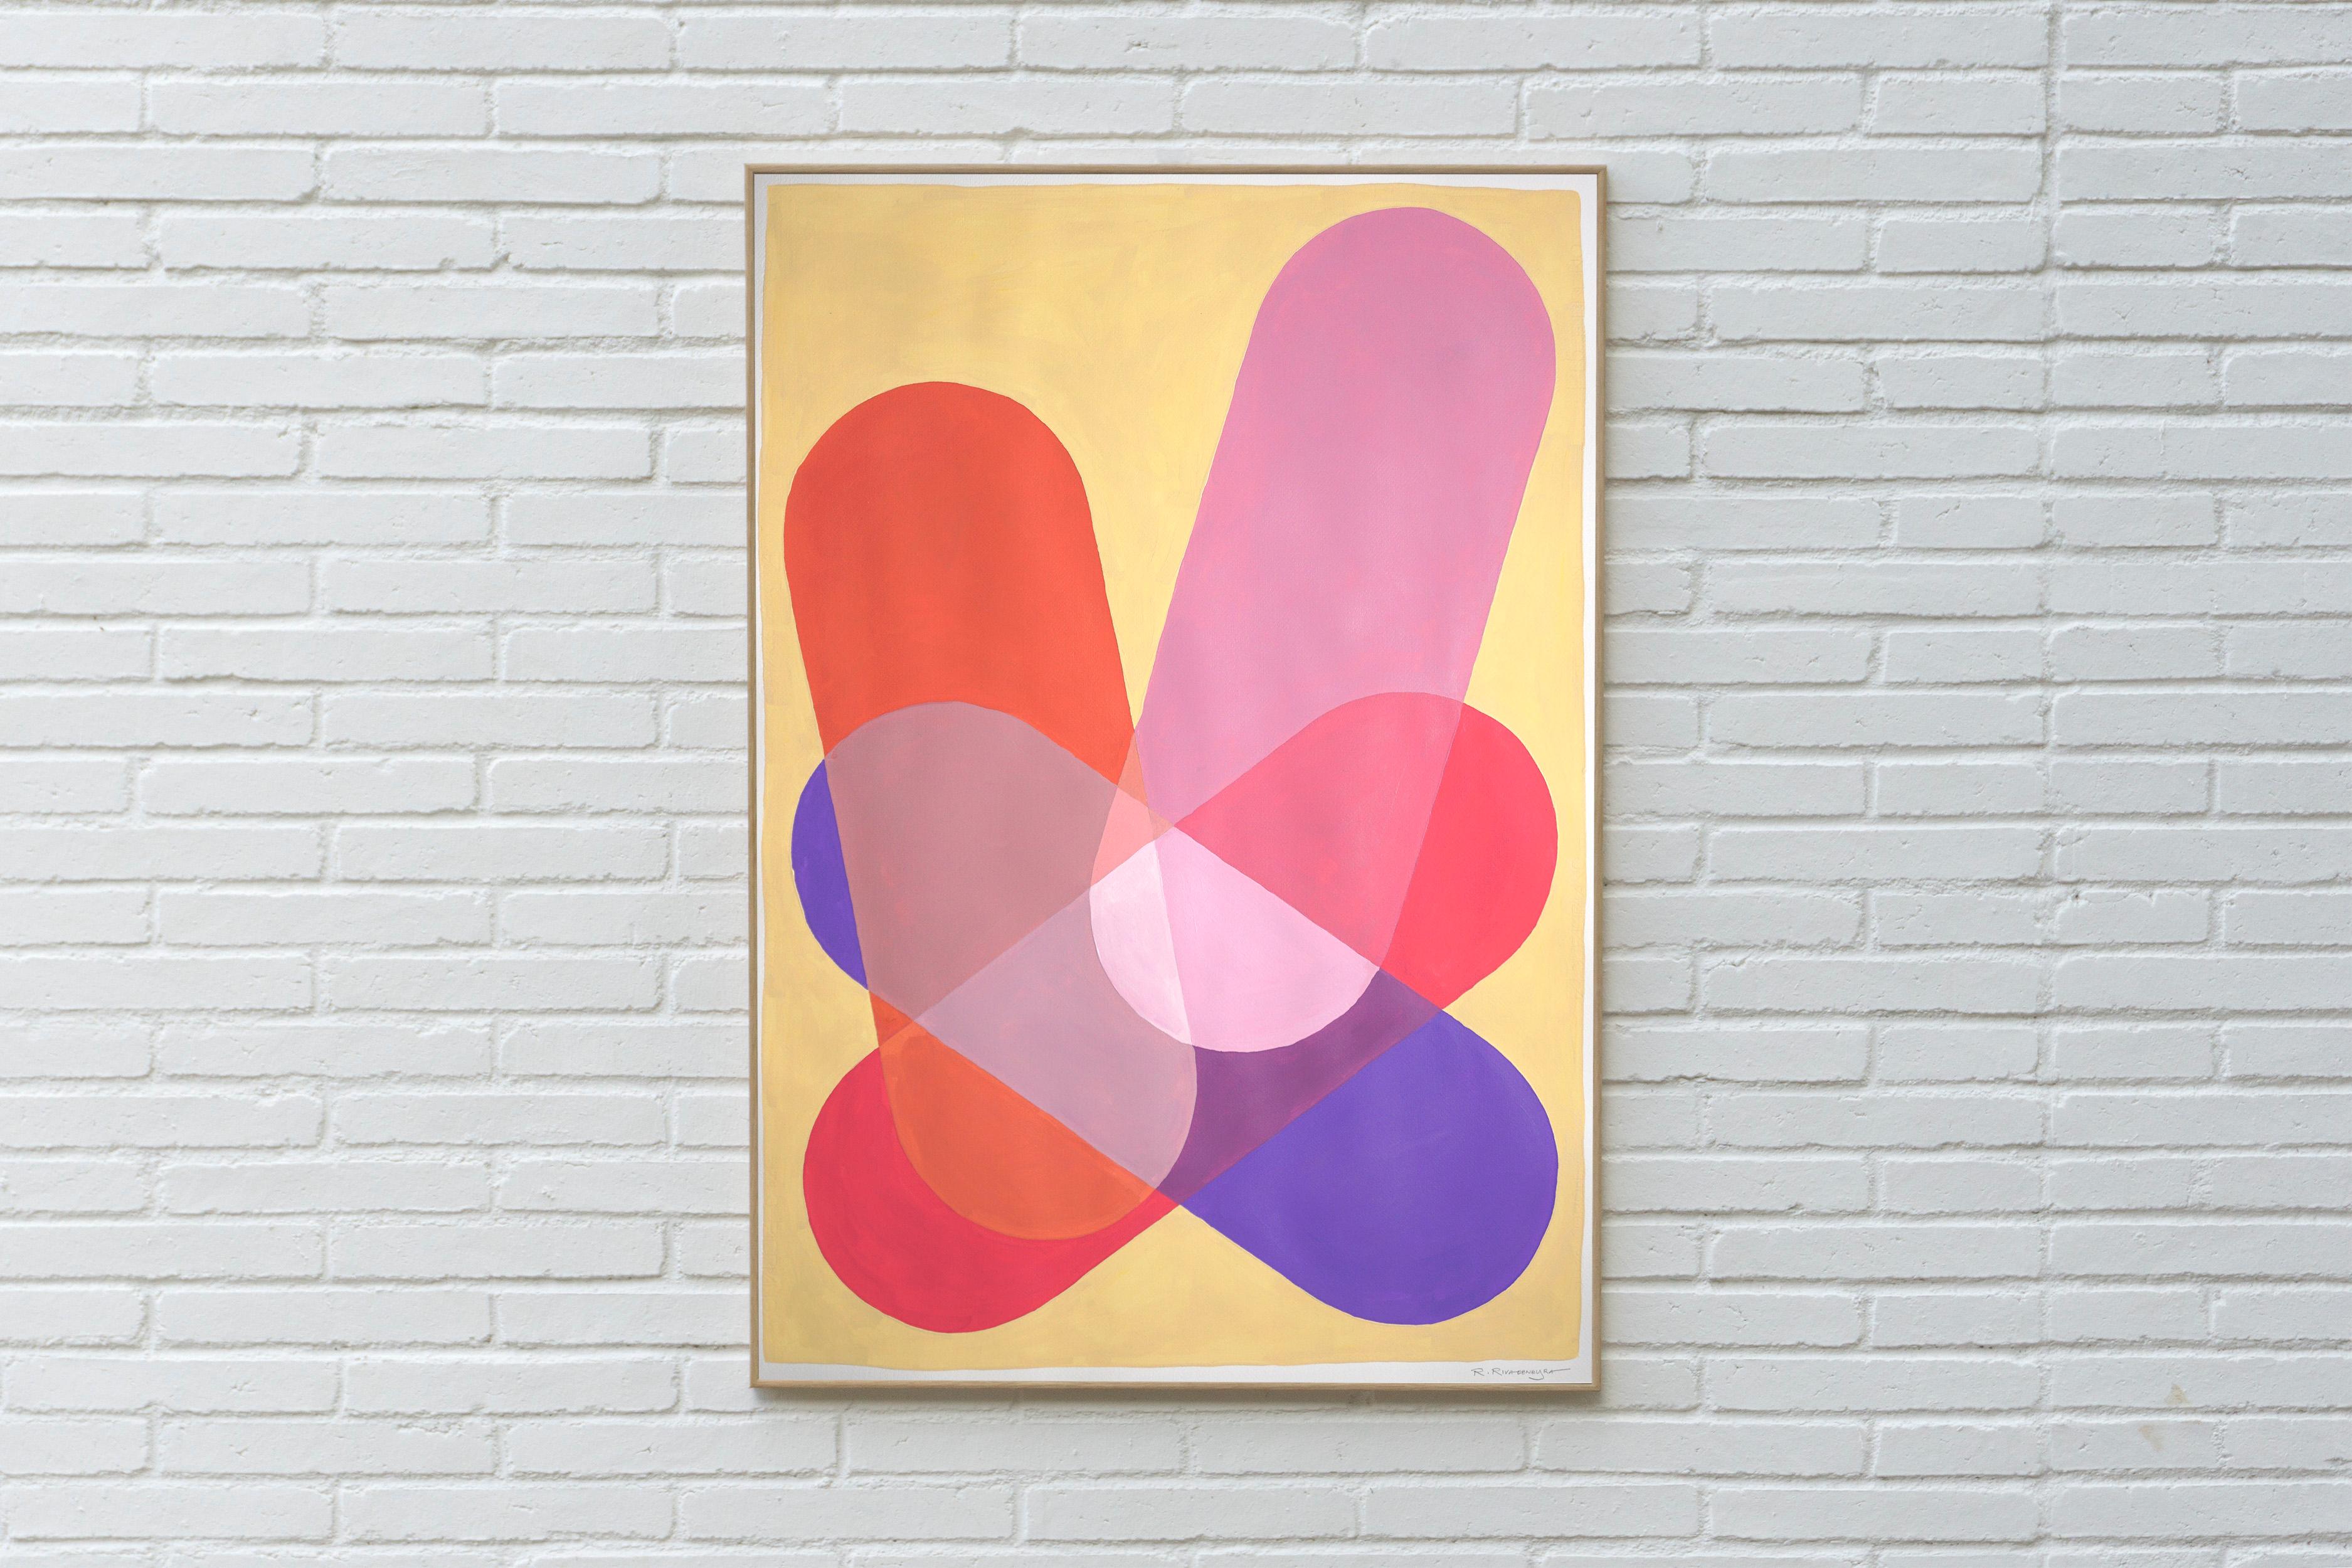 Pill Shape Explosion, Pink and Vanilla Bold Shapes and Transparencies, Modern - Painting by Ryan Rivadeneyra